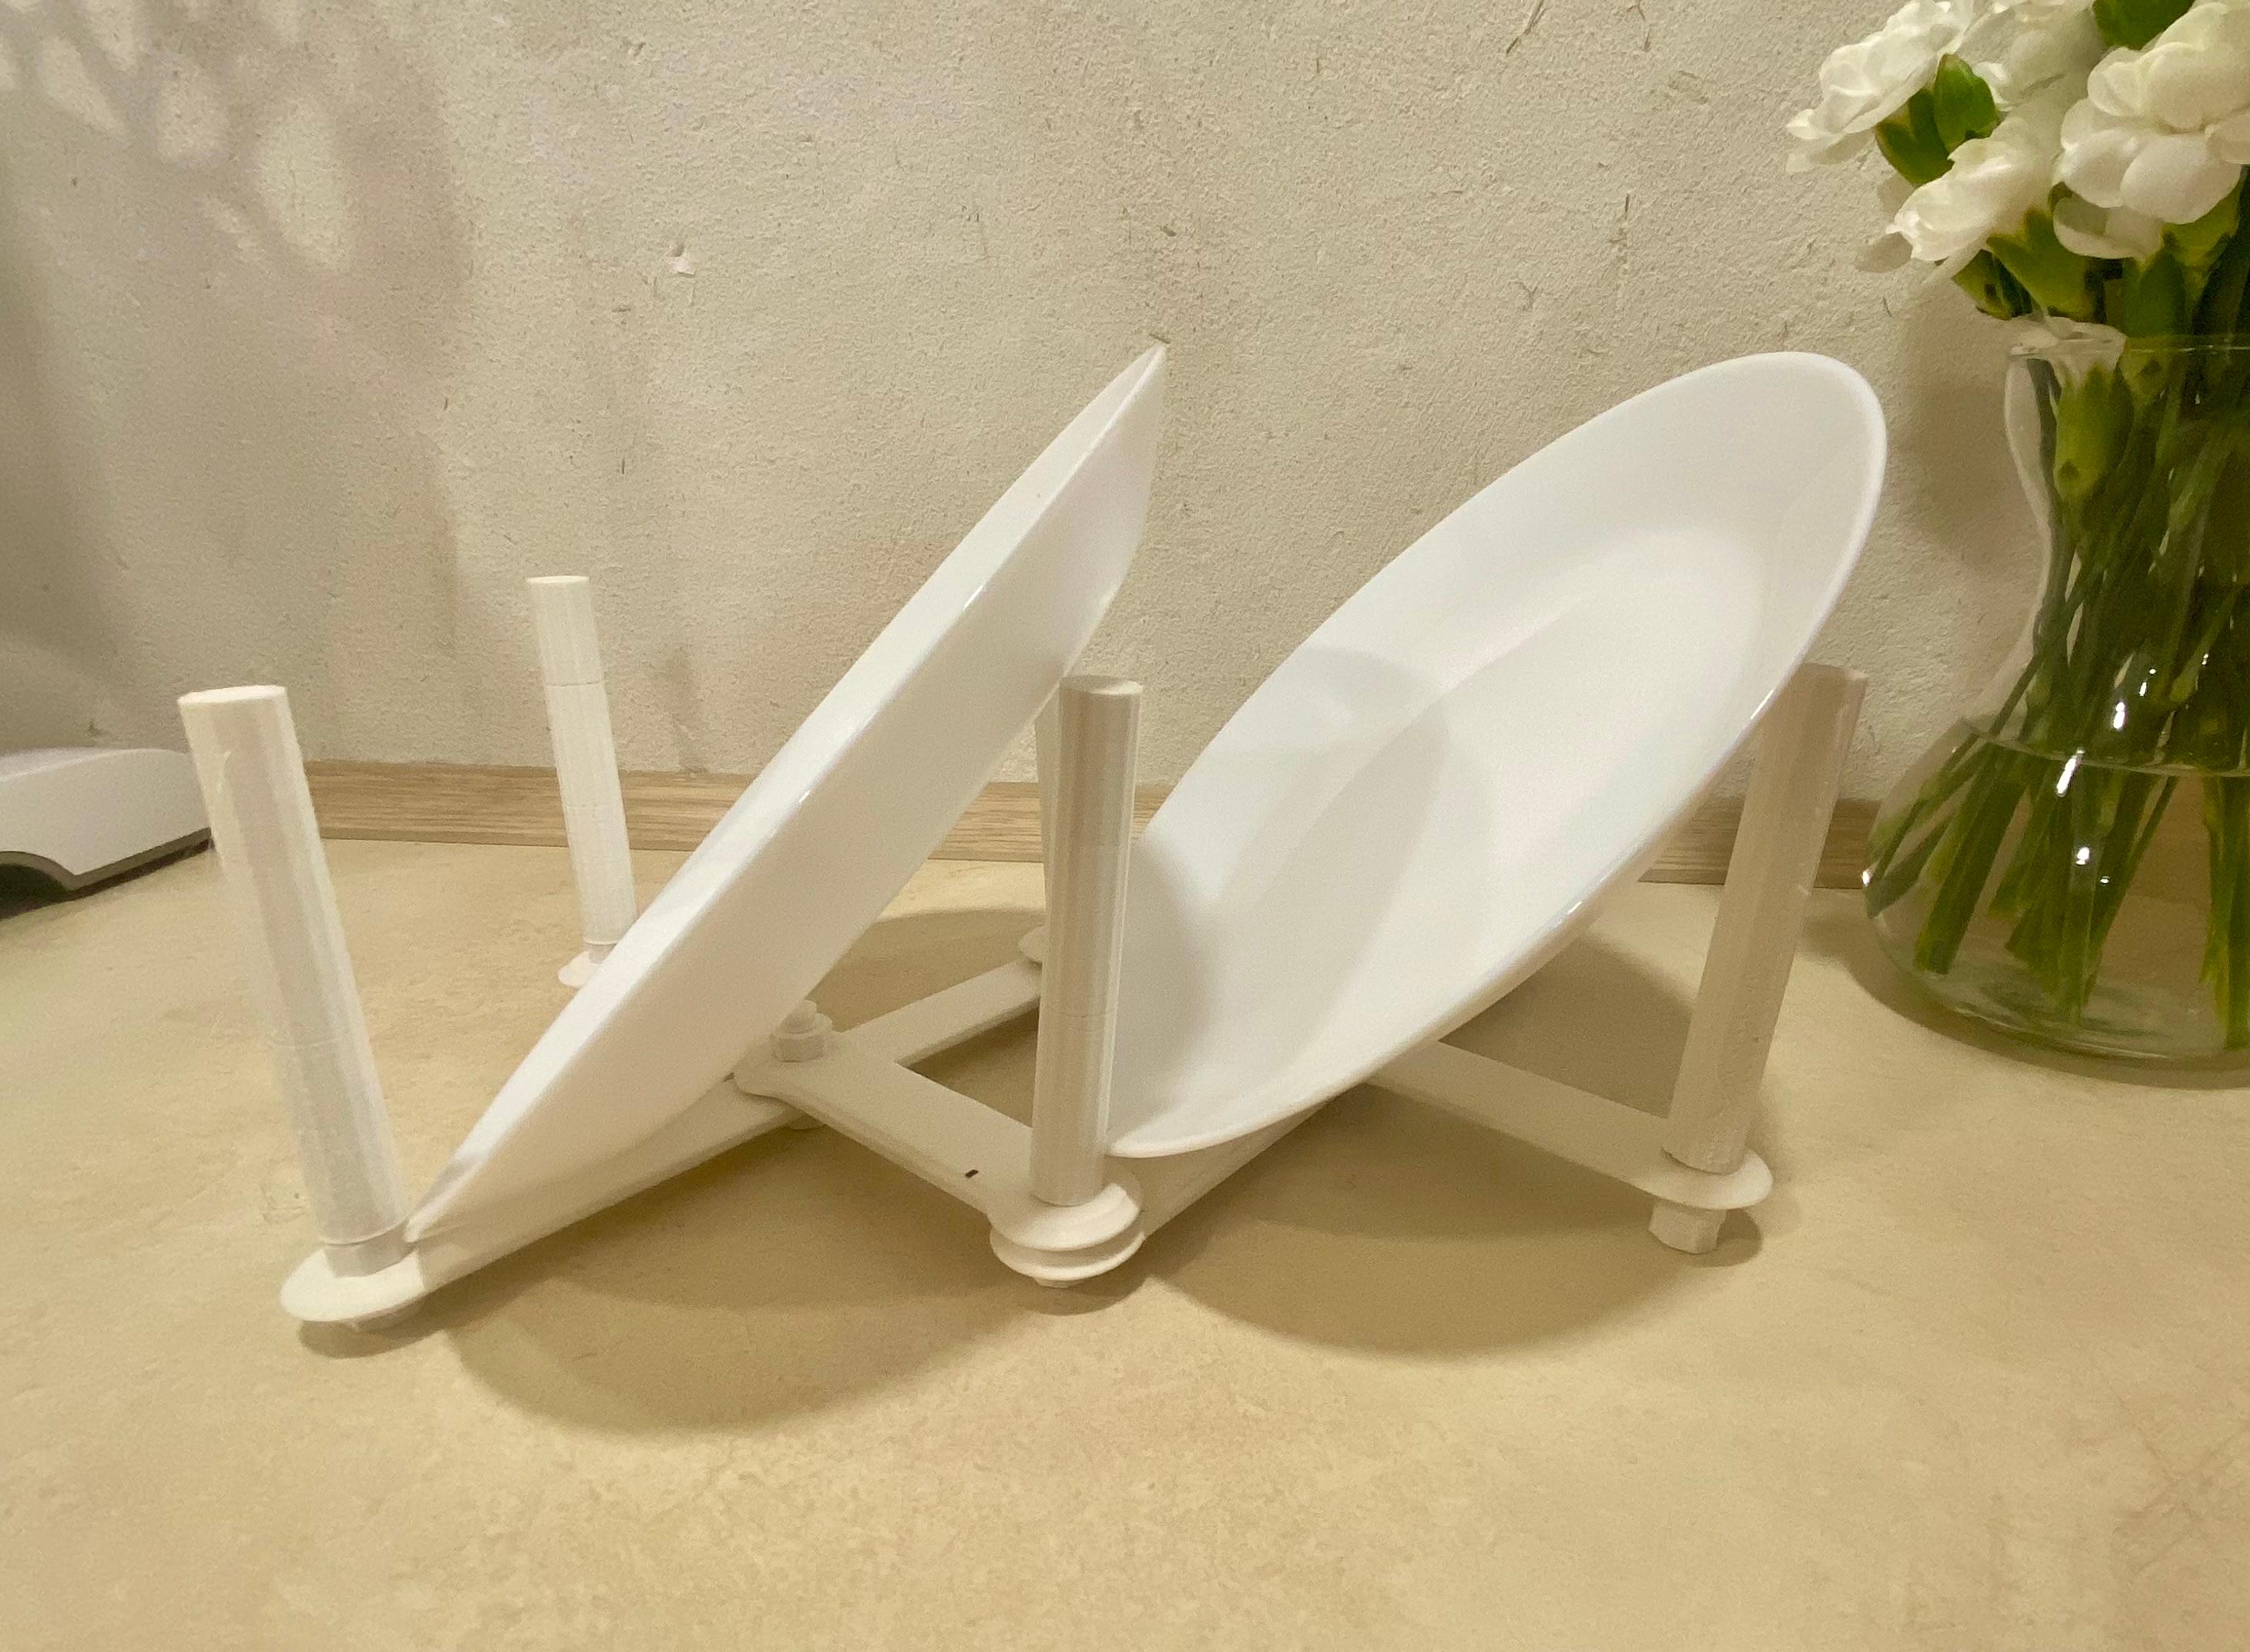 Dish holder / Plates stand / Plates and lids Organizer 3d model